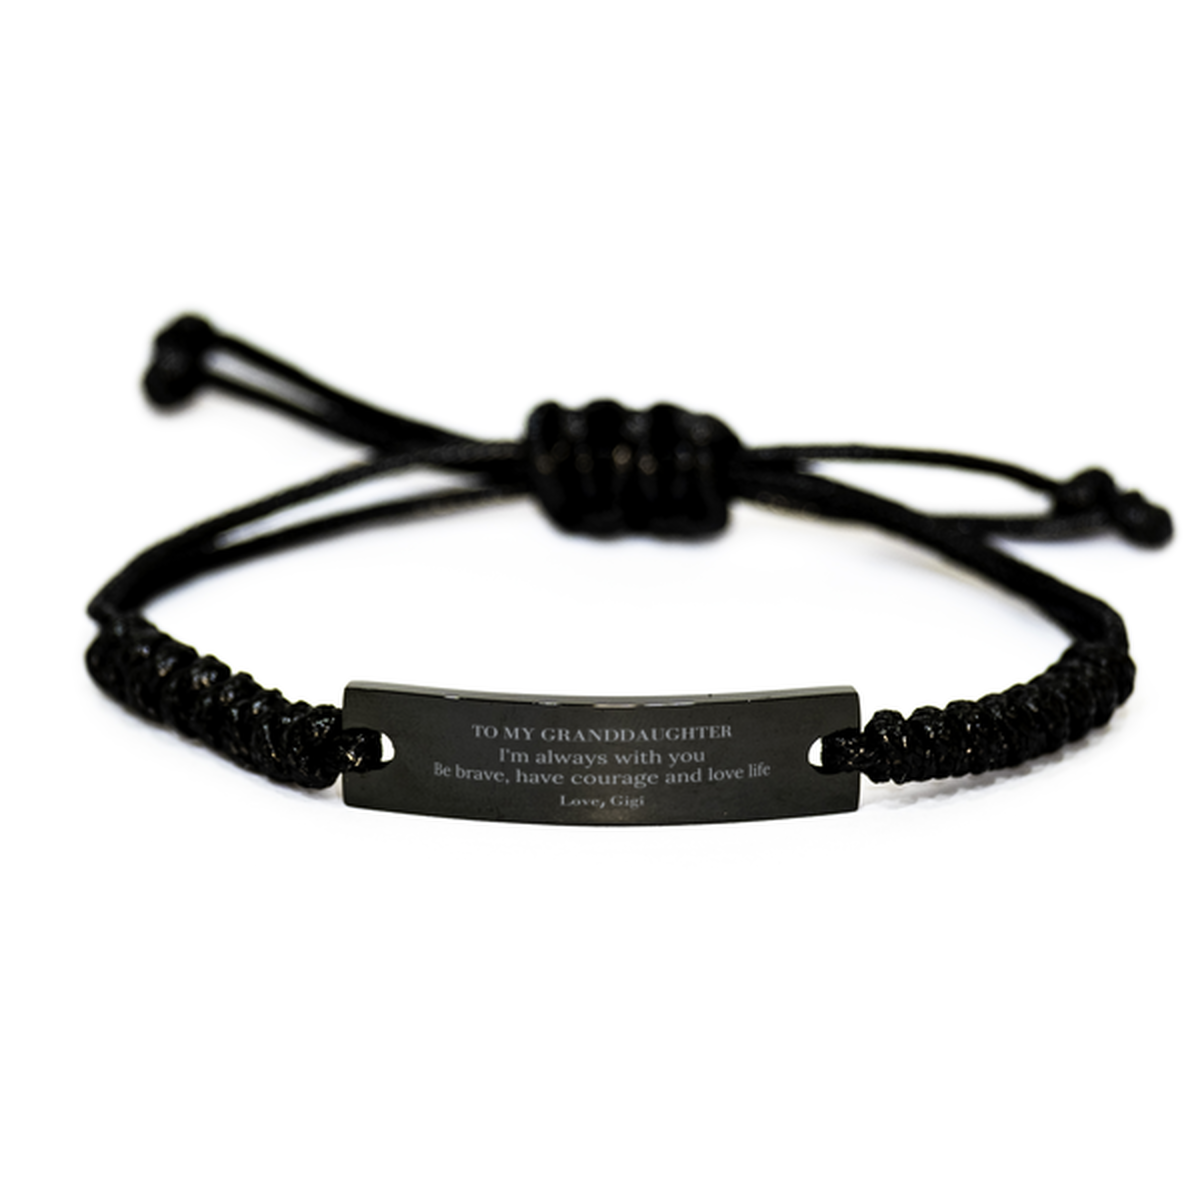 To My Granddaughter Gifts from Gigi, Unique Black Rope Bracelet Inspirational Christmas Birthday Graduation Gifts for Granddaughter I'm always with you. Be brave, have courage and love life. Love, Gigi